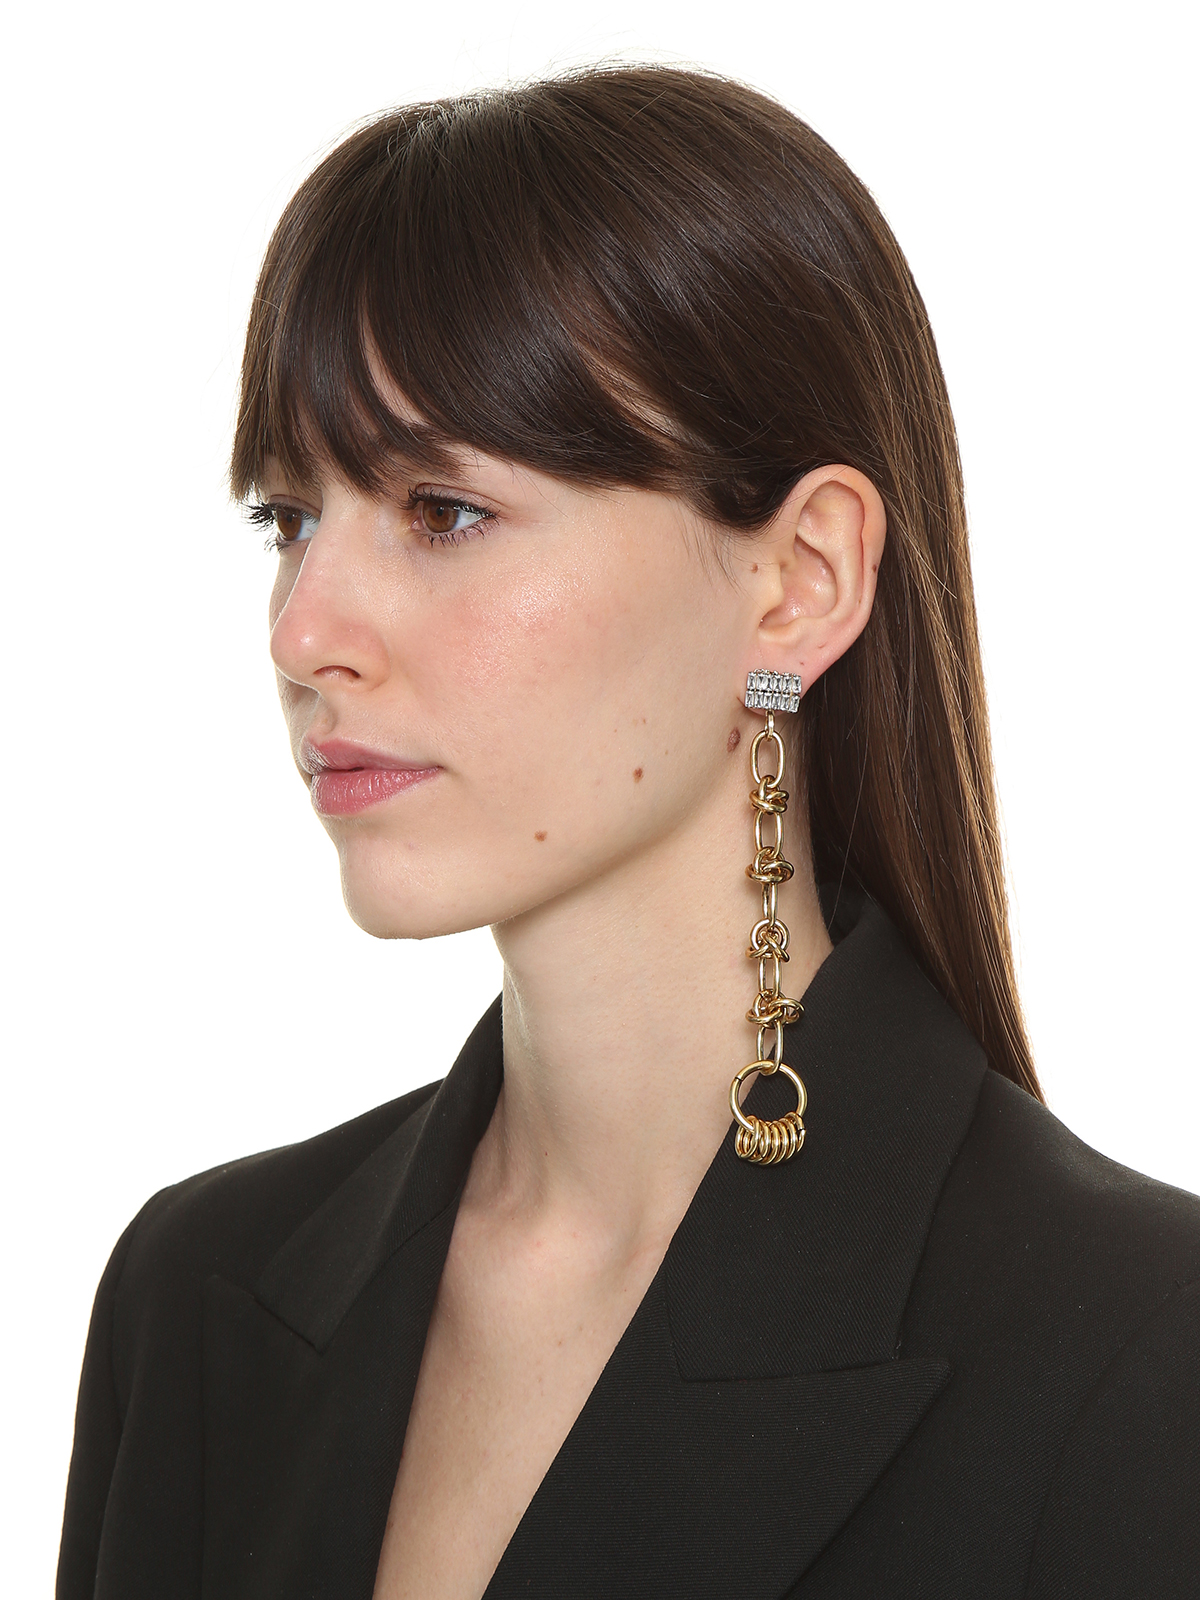 Pendent  crystal and chain earrings embellished with rings